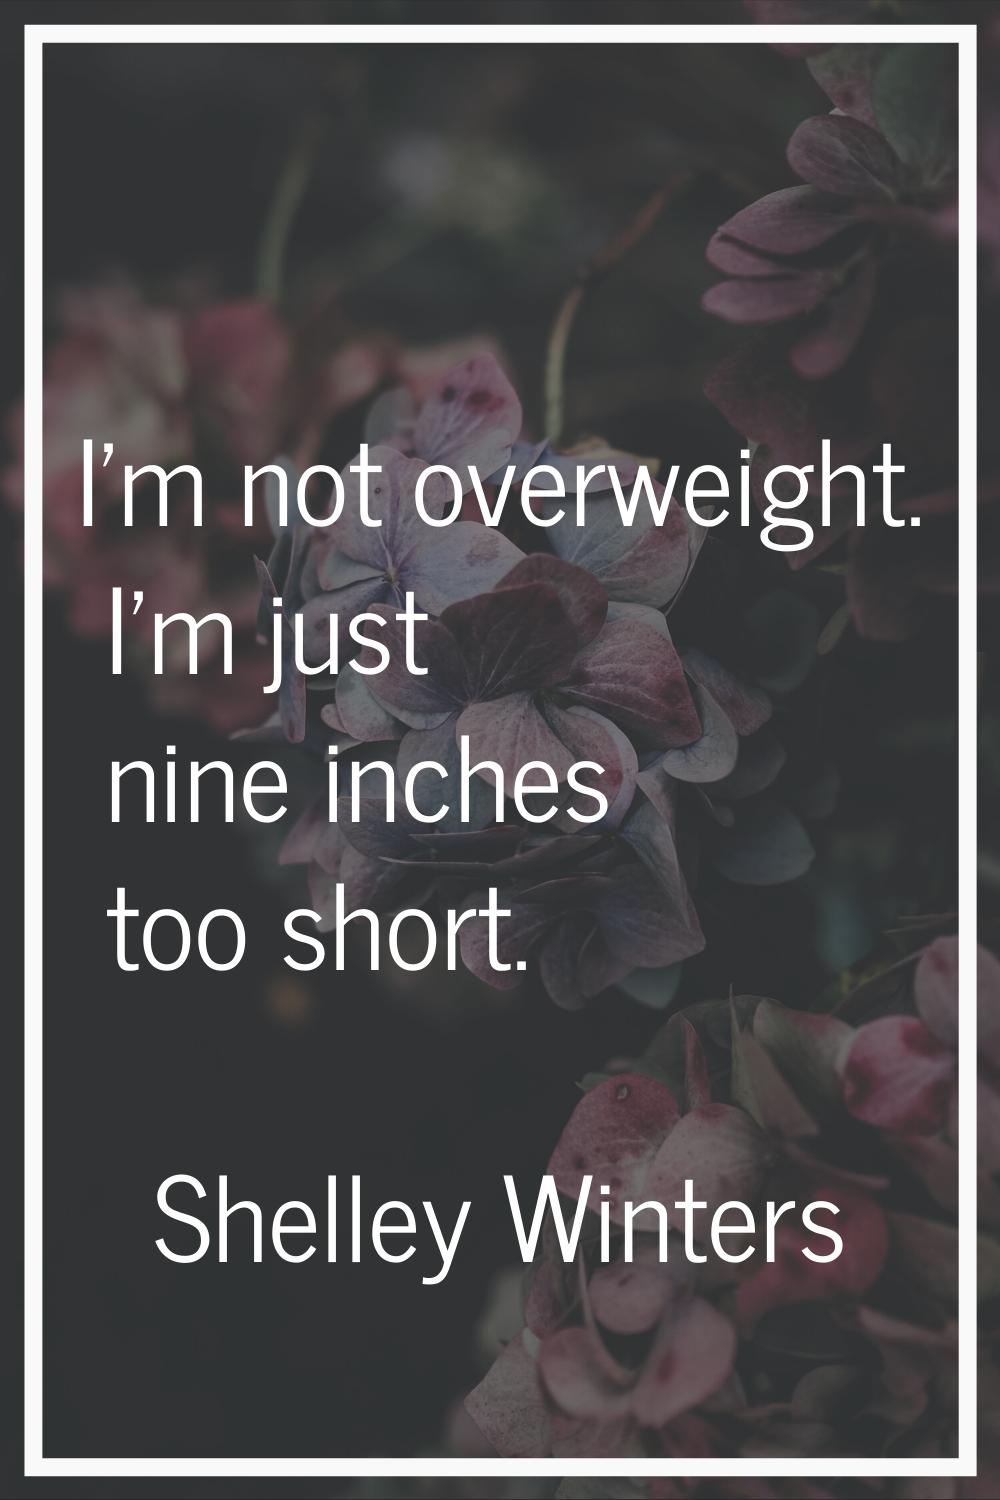 I'm not overweight. I'm just nine inches too short.